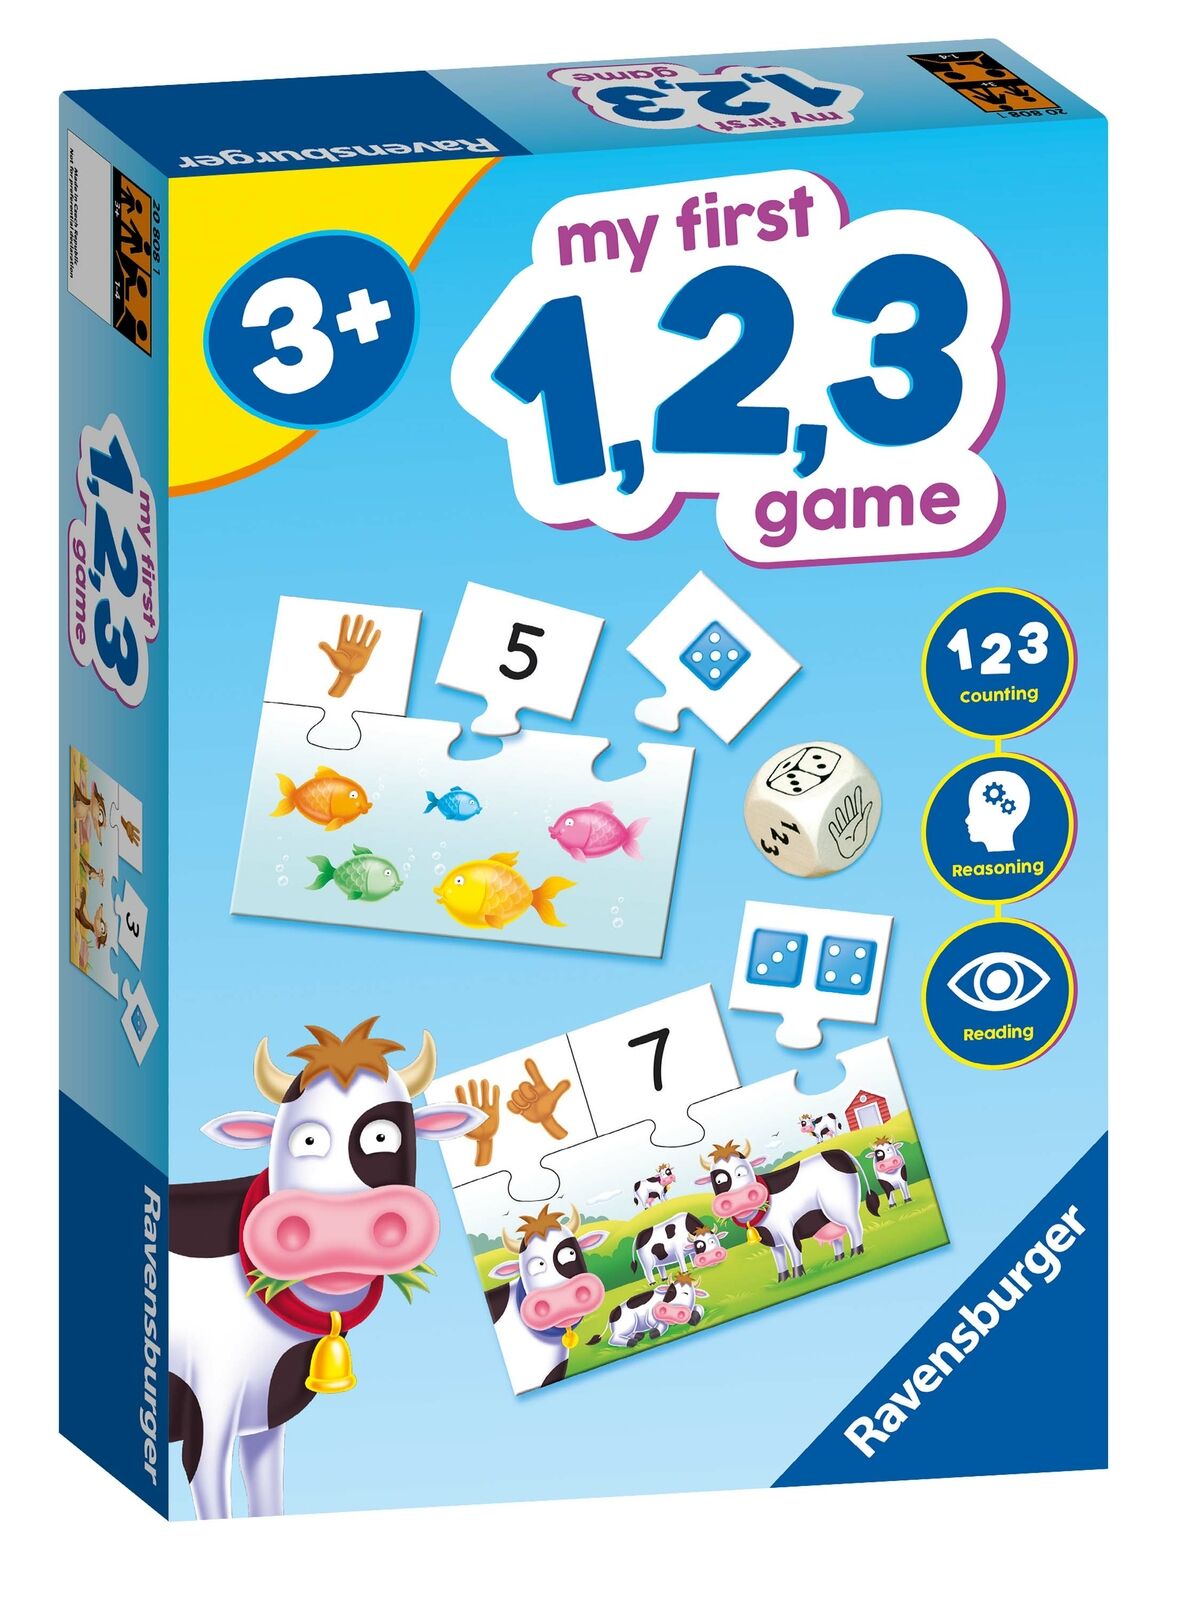 20808 Ravensburger My First 1,2,3 Card Pairs Match Game Children Toddler Age 3+